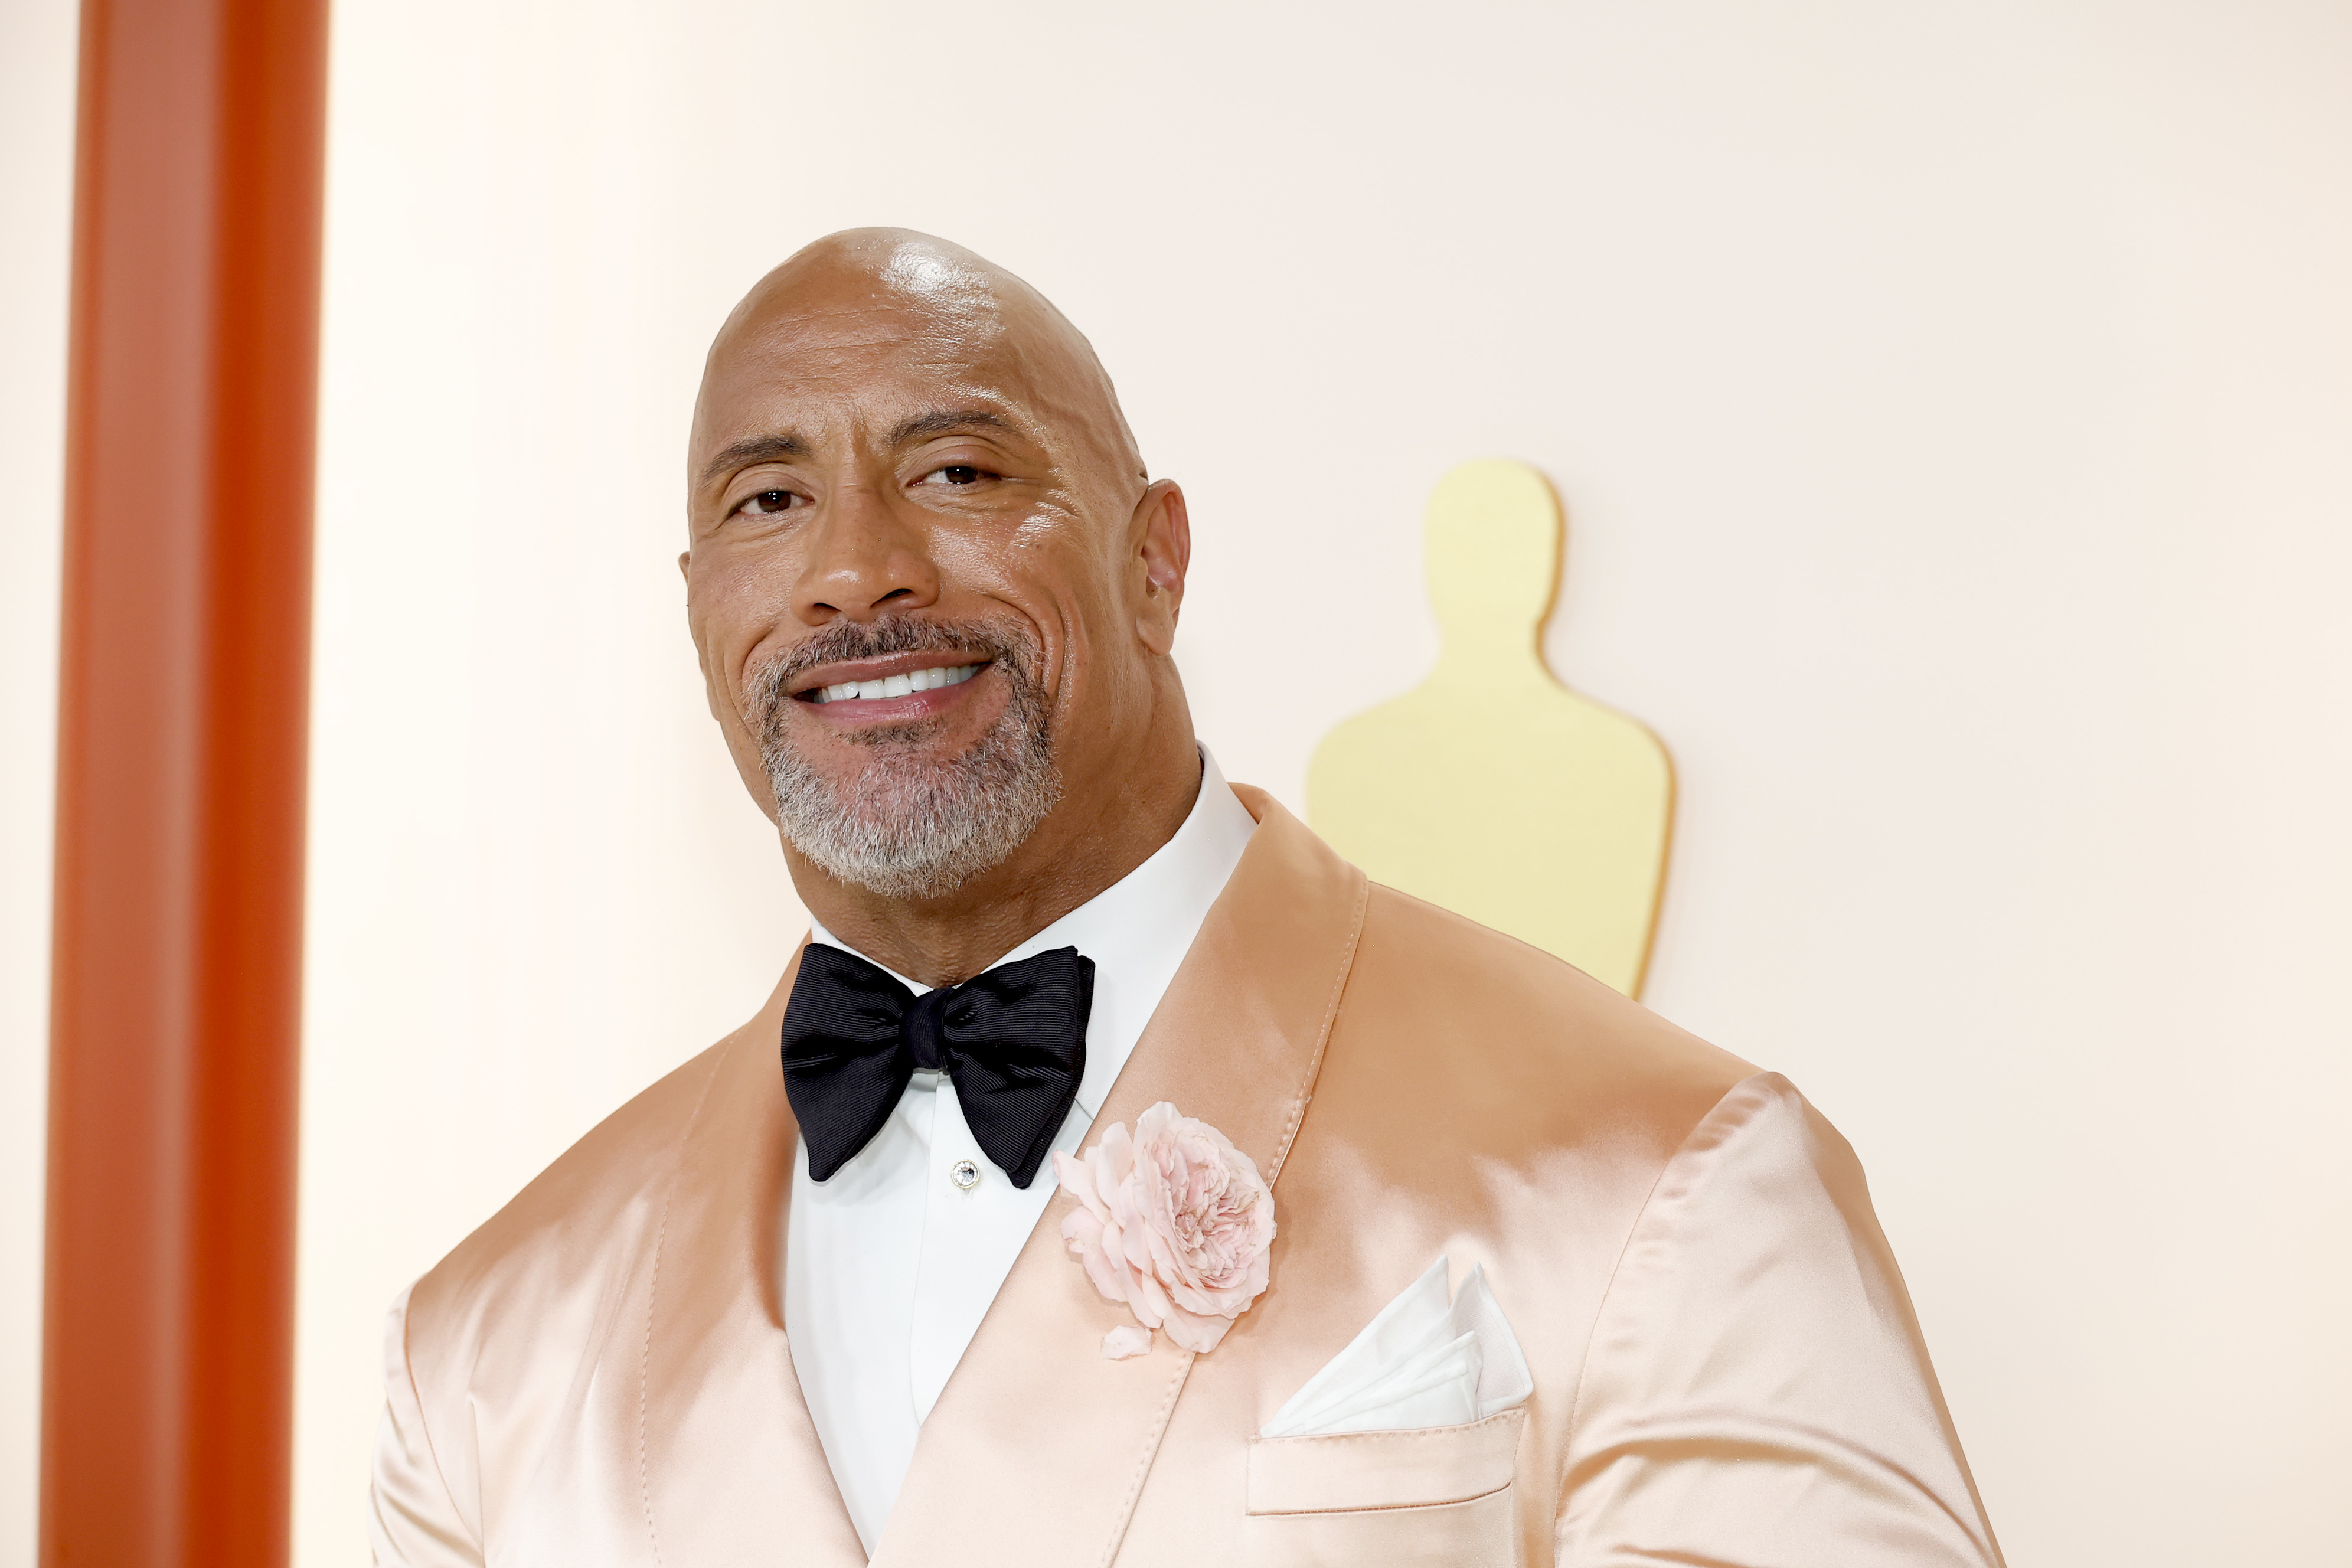 Dwayne Johnson wearing a pastel tuxedo with a bow tie and floral lapel pin